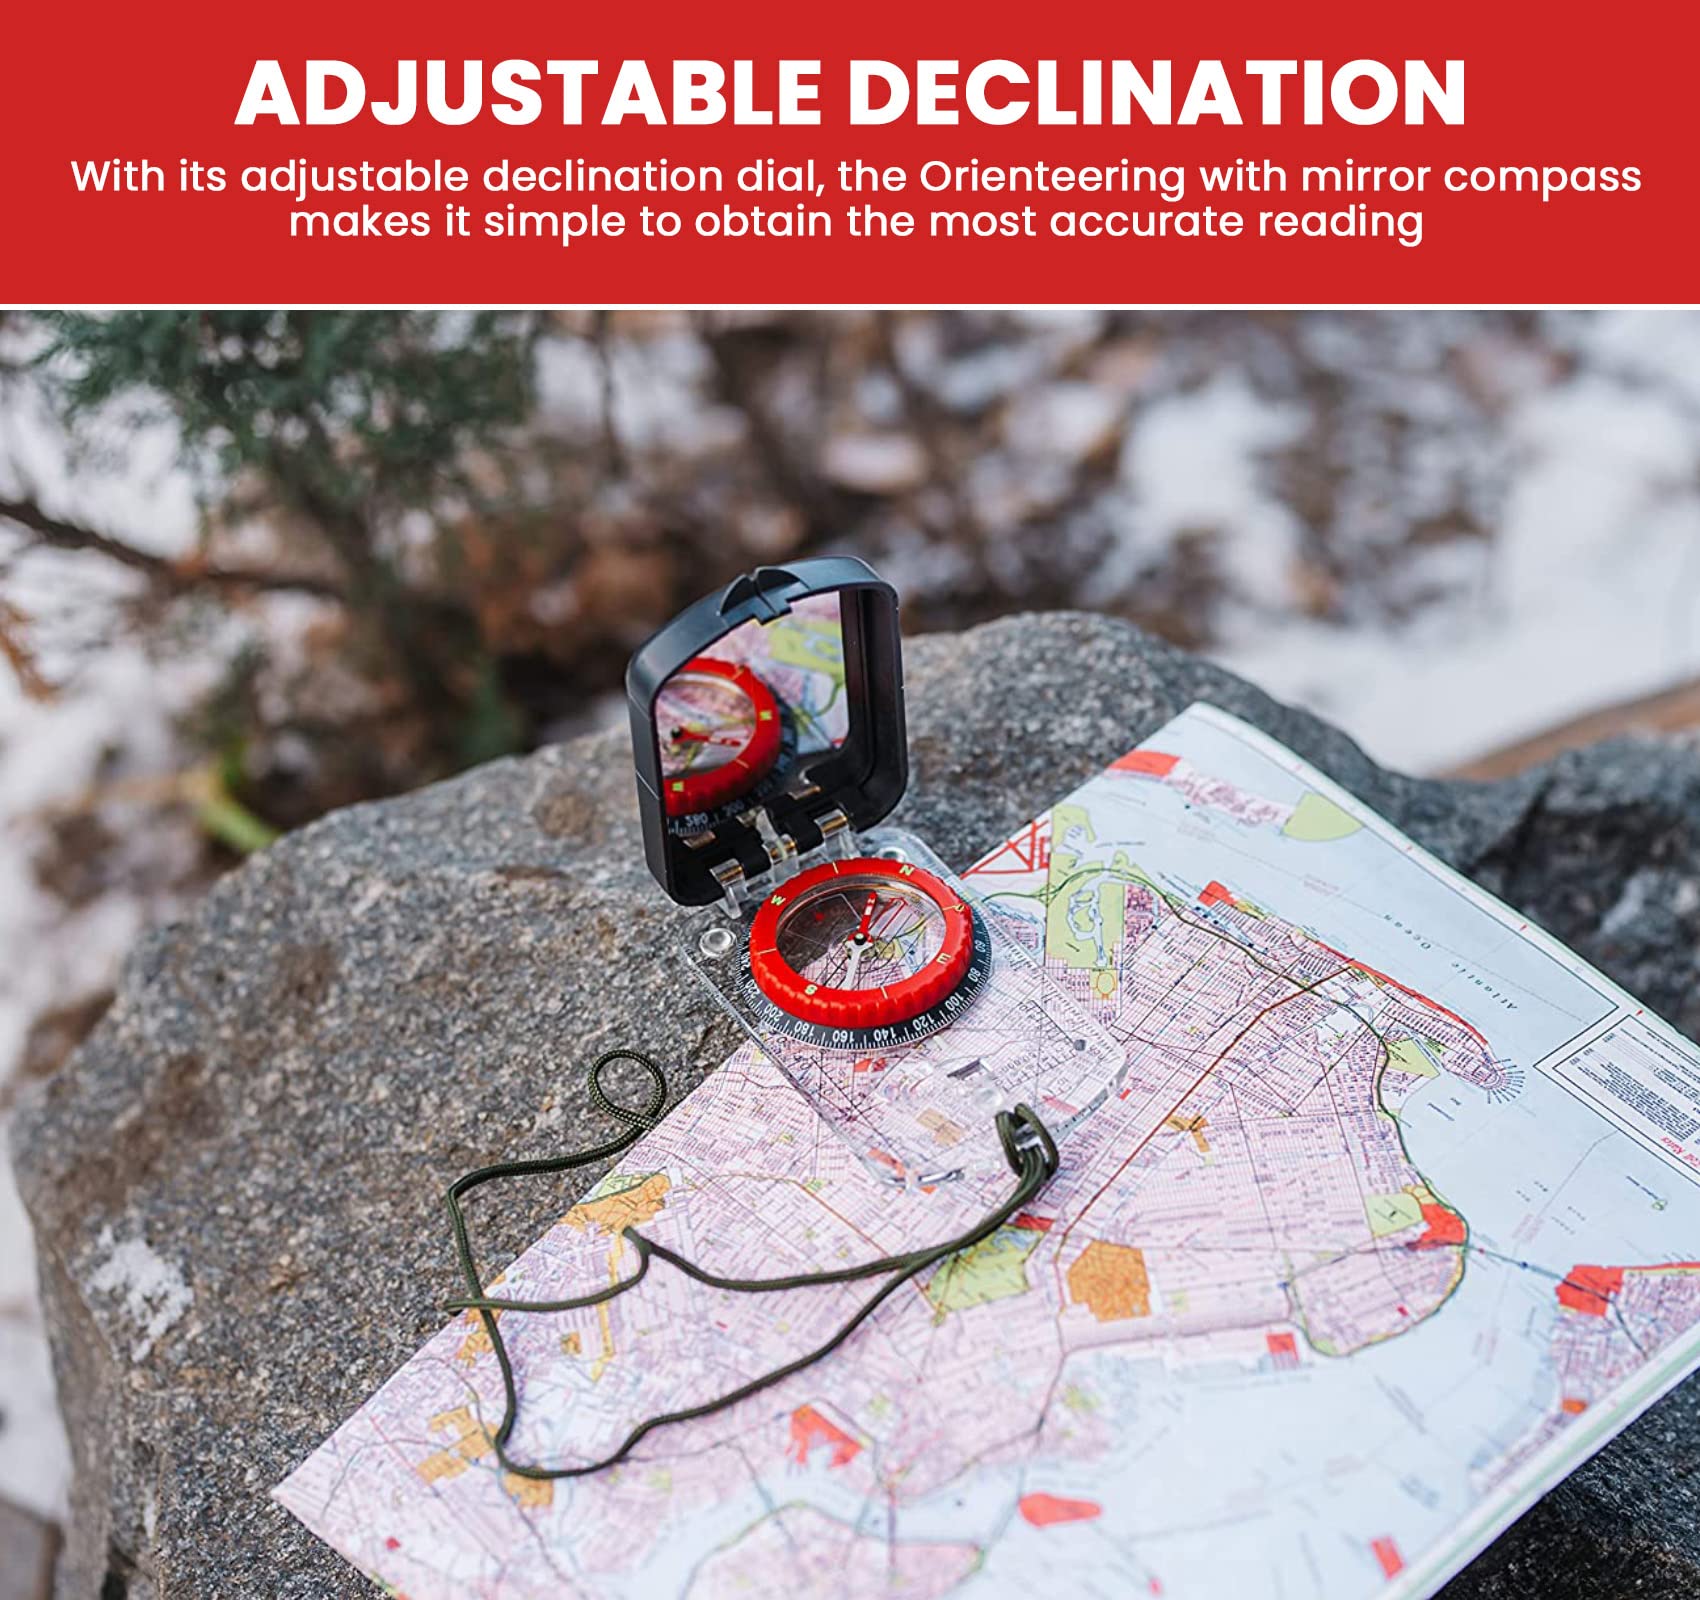 Sighting Compass Mirror Adjustable Declination - Boy Scout Compass Survival Camping | Base Plate Compass Kids Navigation | Orienteering Compass Hiking Map Read Military Compass Backpacking Clinometers